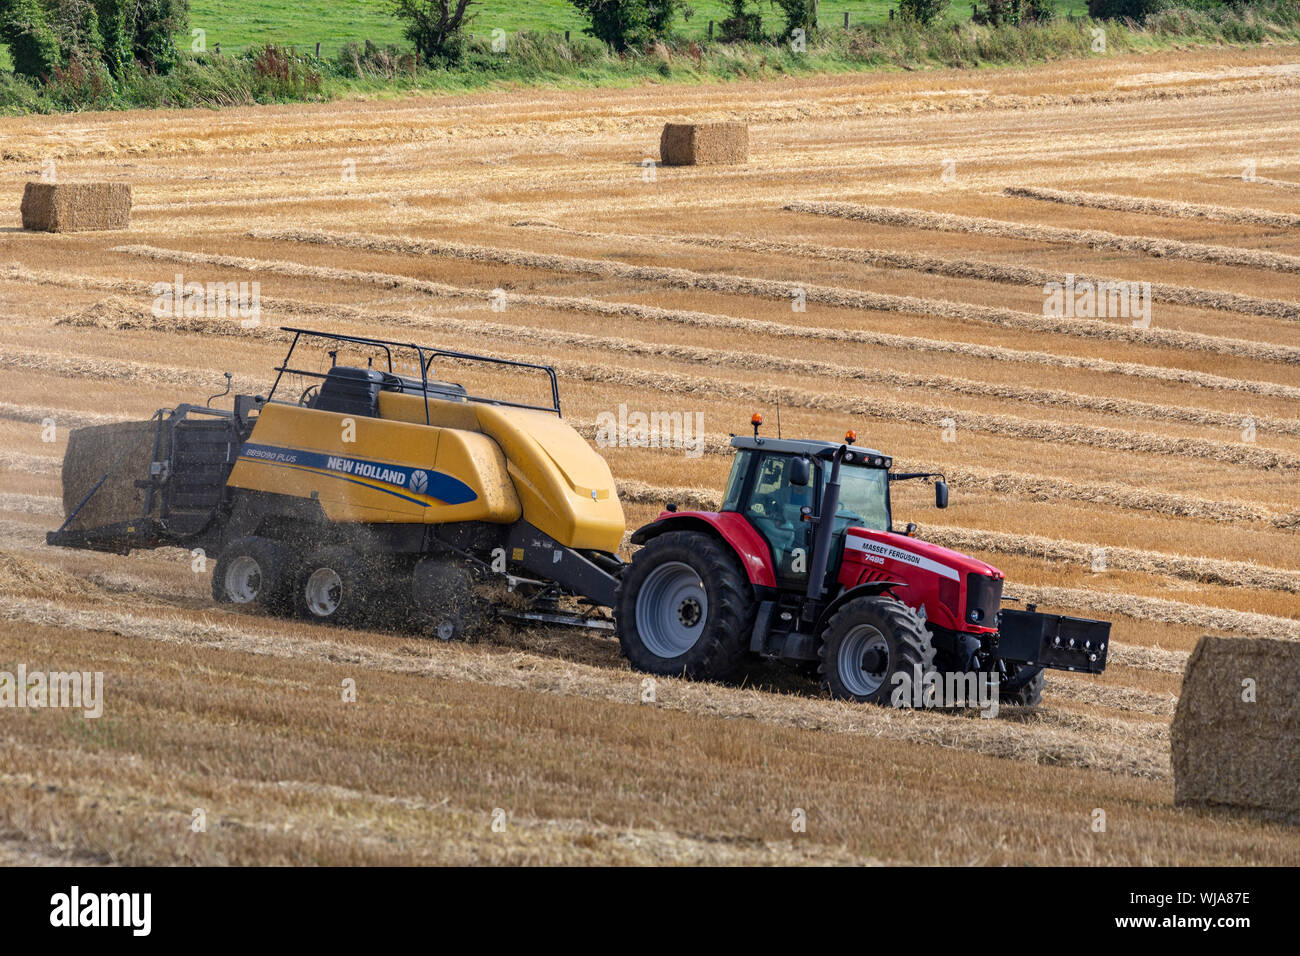 Hay Baler - farm machinery used to compress a cut and raked crop (such as hay, cotton, flax straw, salt marsh hay, or silage) into compact bales that Stock Photo